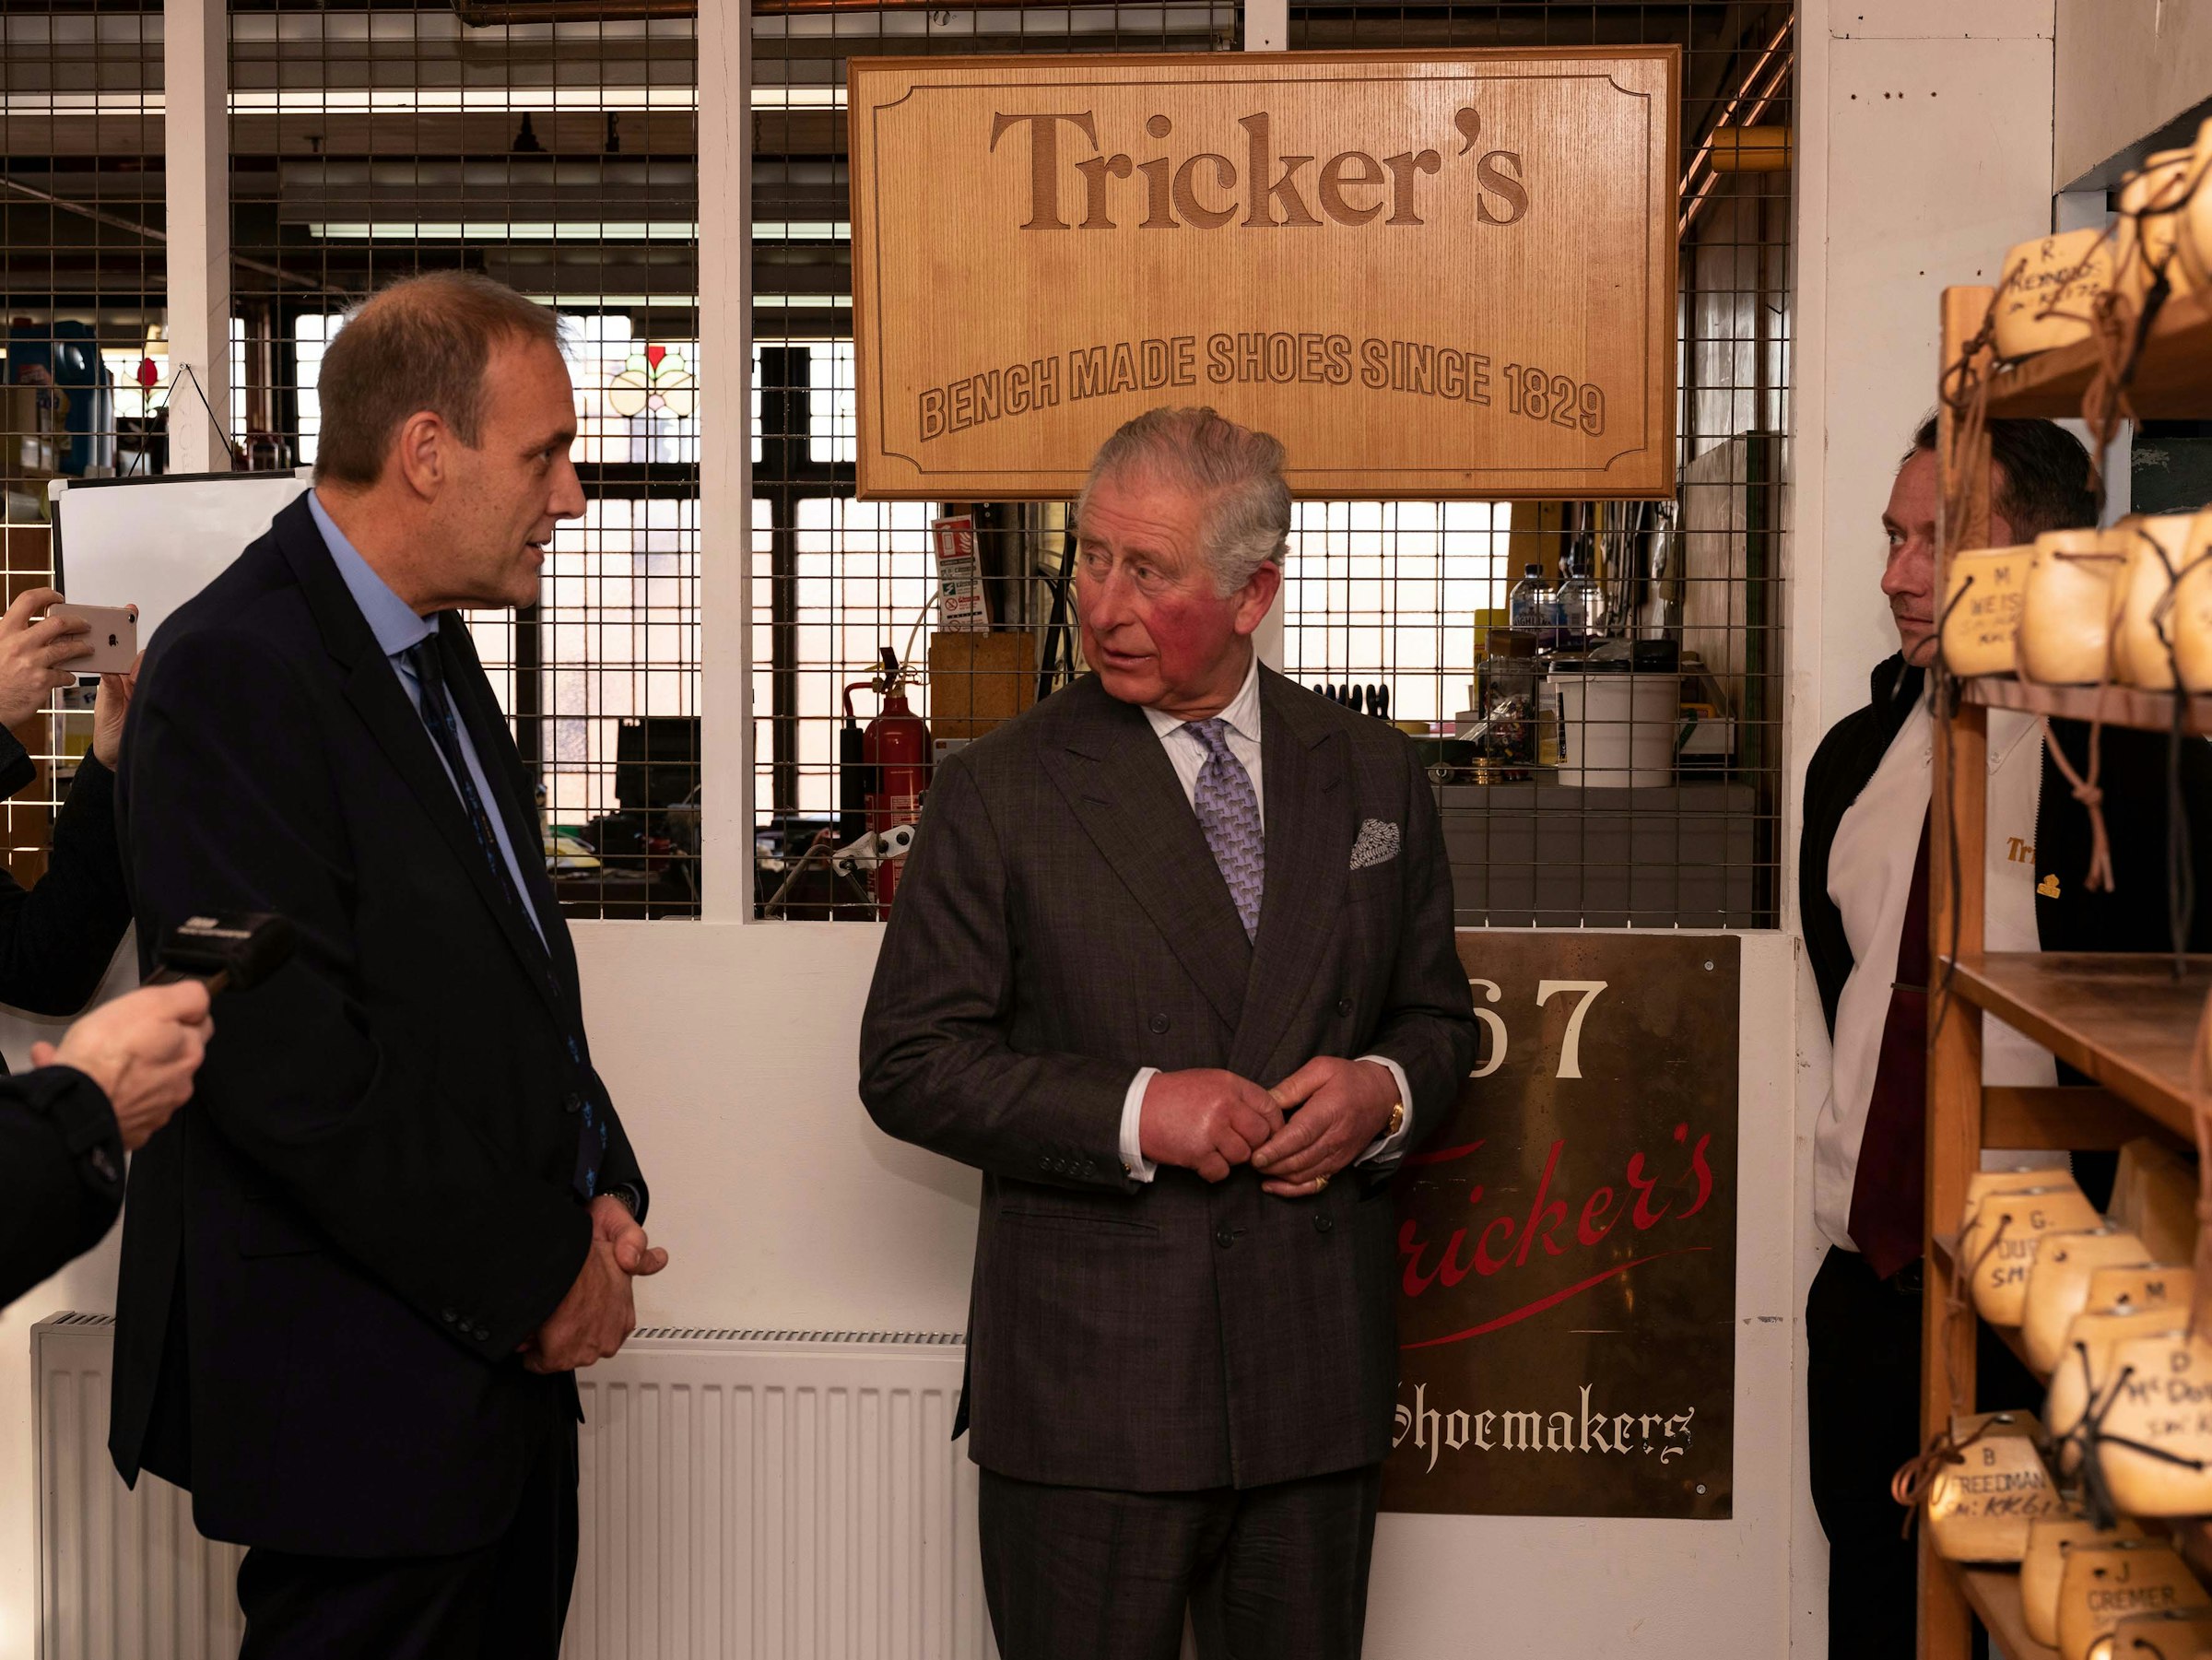 King Charles, then Prince of Wales, visiting Tricker's headquarters